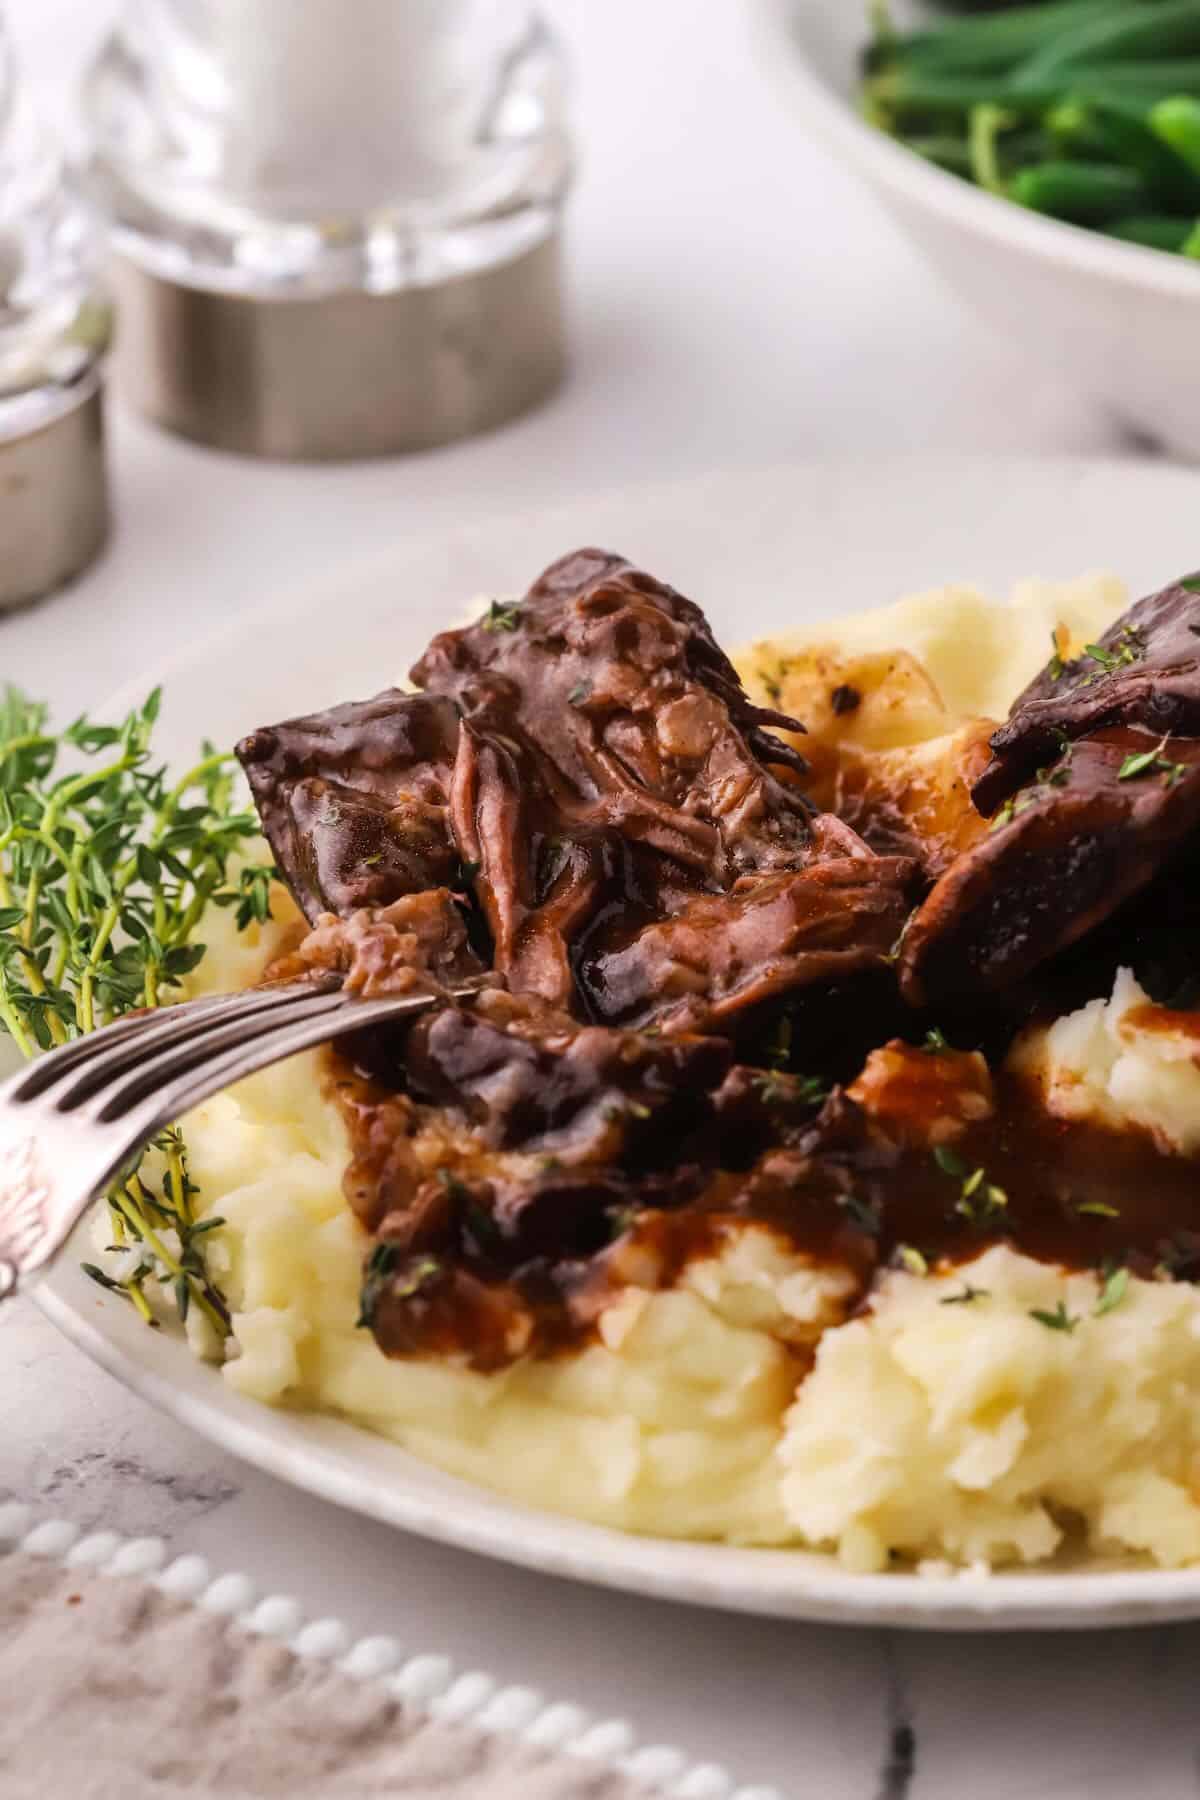 Beef short ribs on a bed of mashed potatoes. 